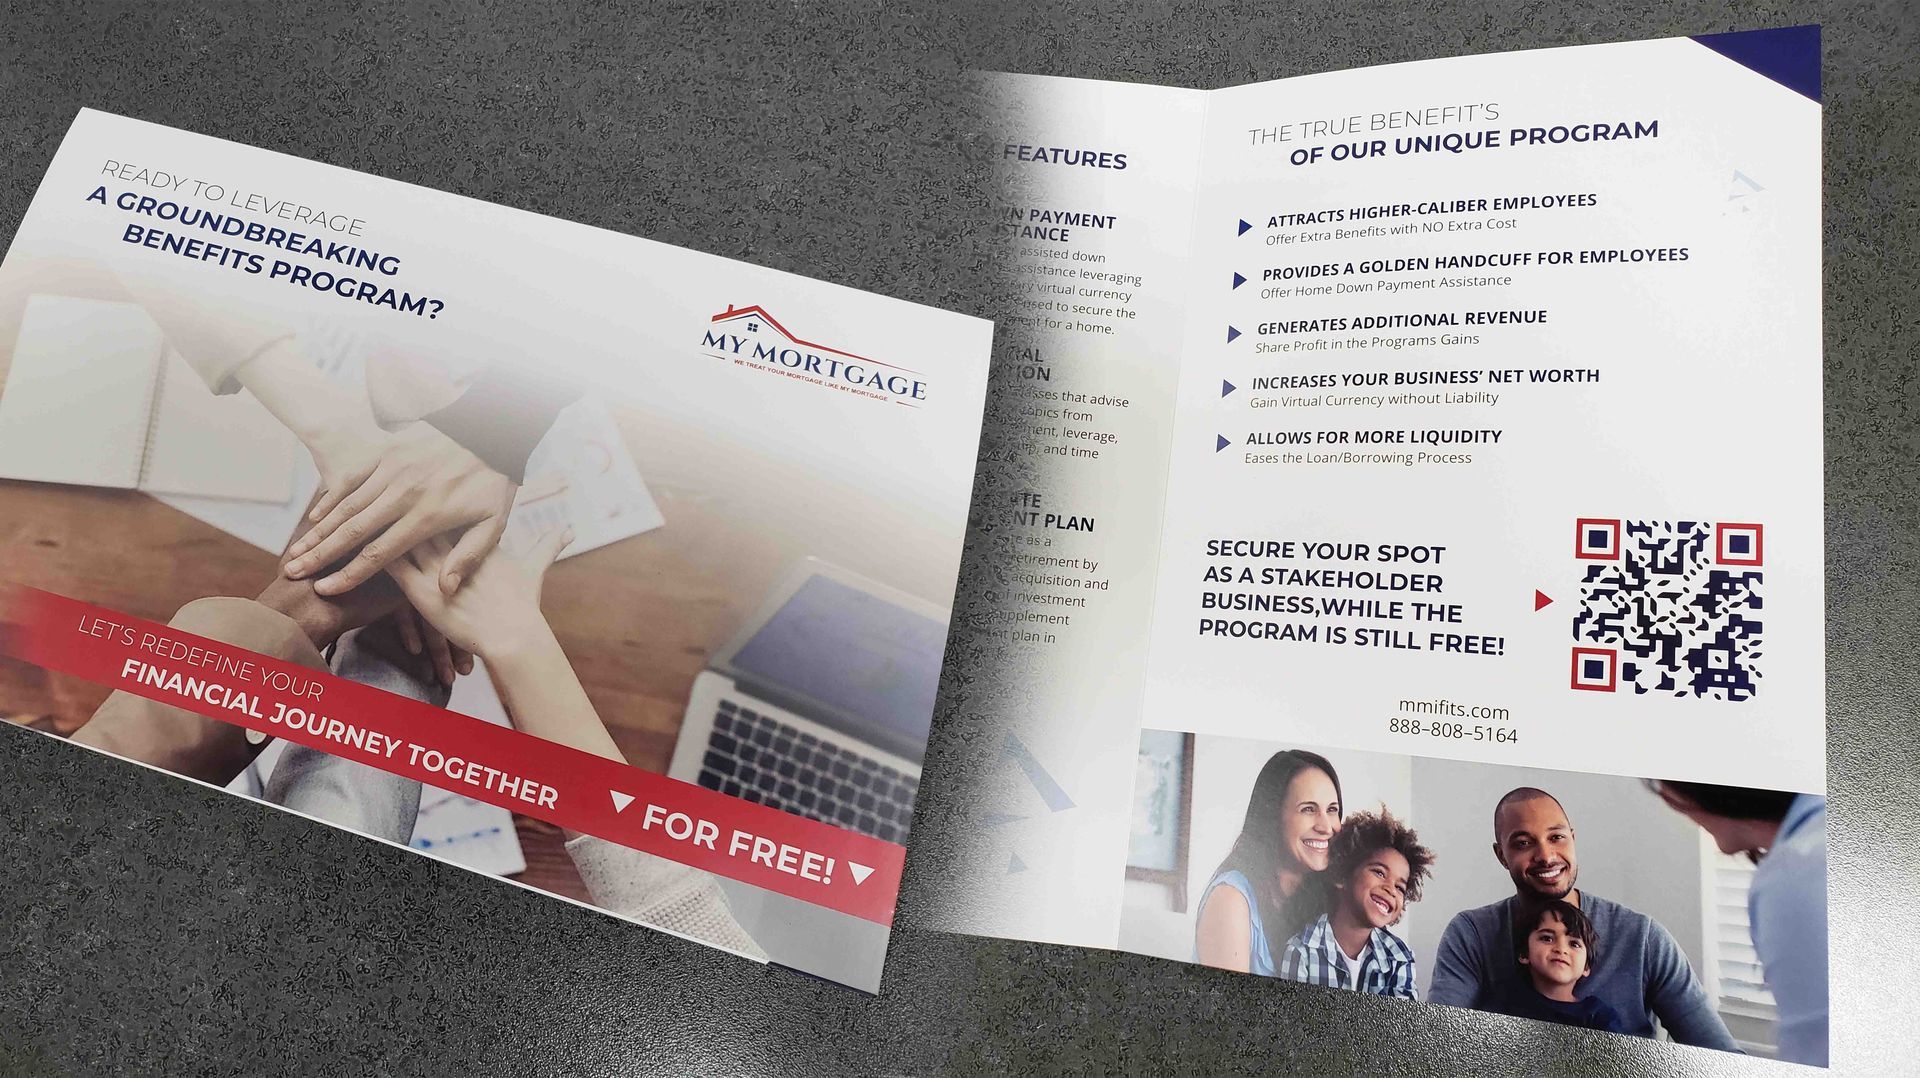 A photo of the cover and inside spread of the My Mortgage brochure mailer.